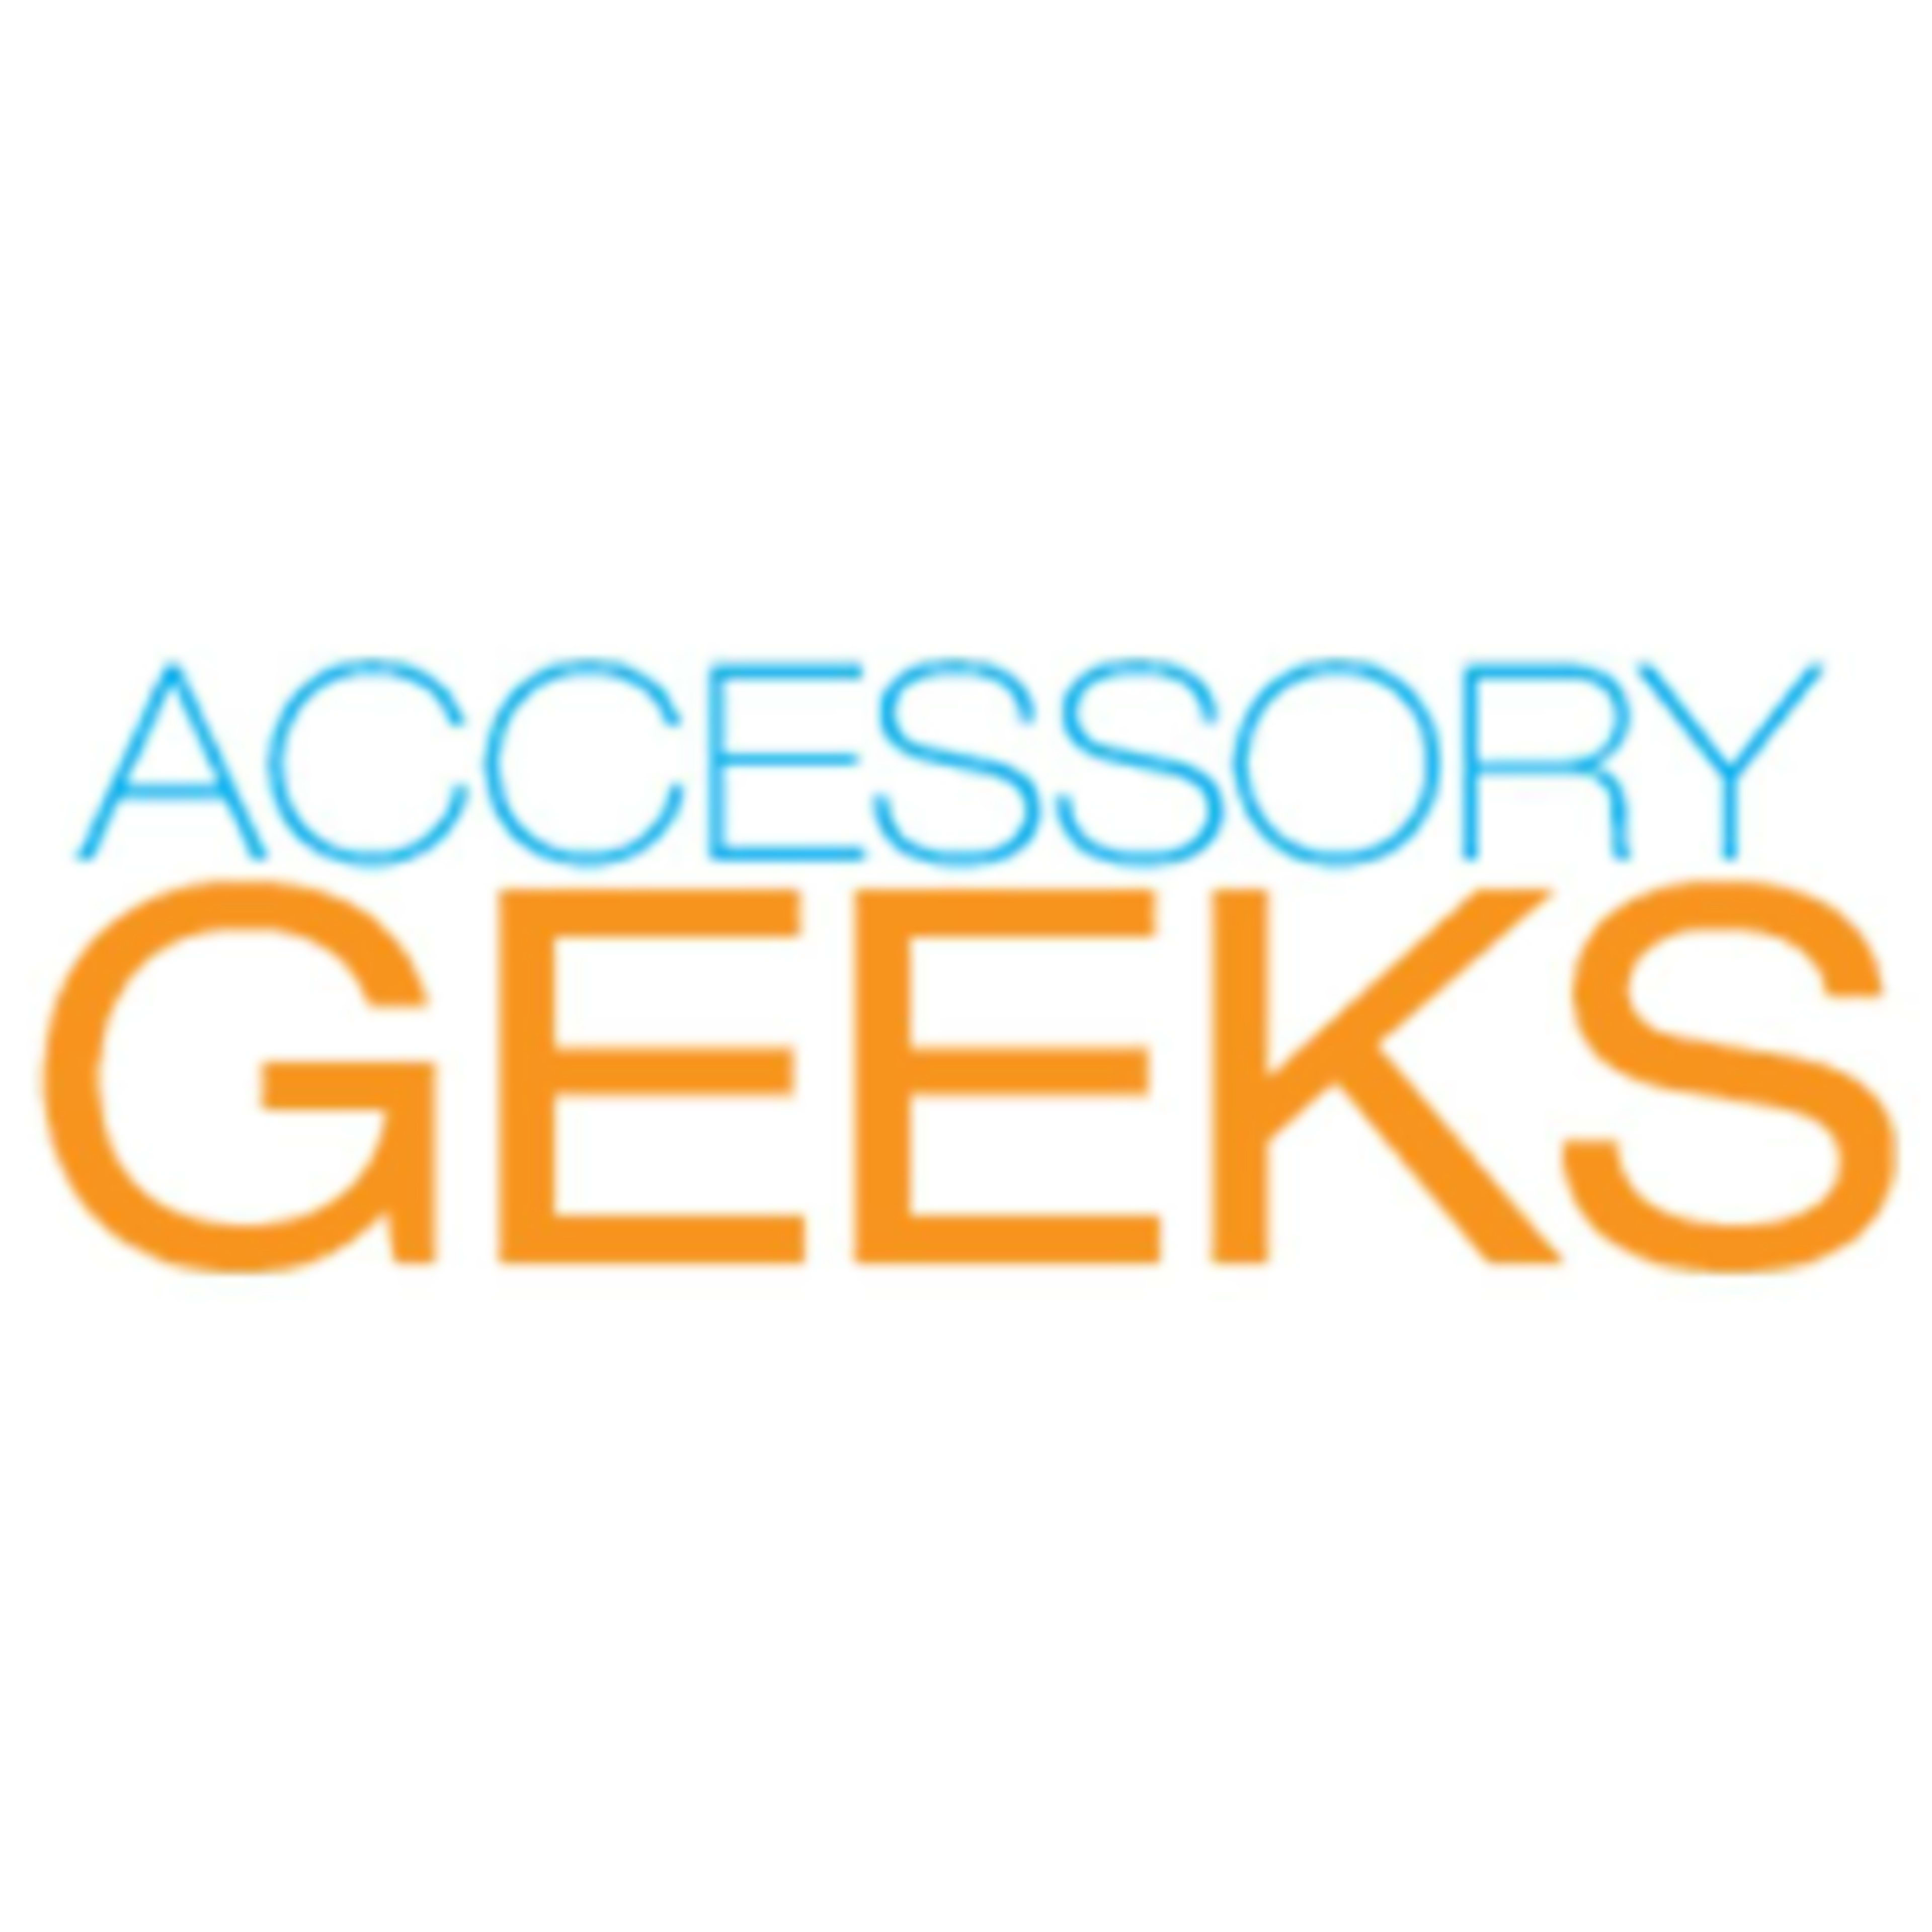 Accessory GeeksCode